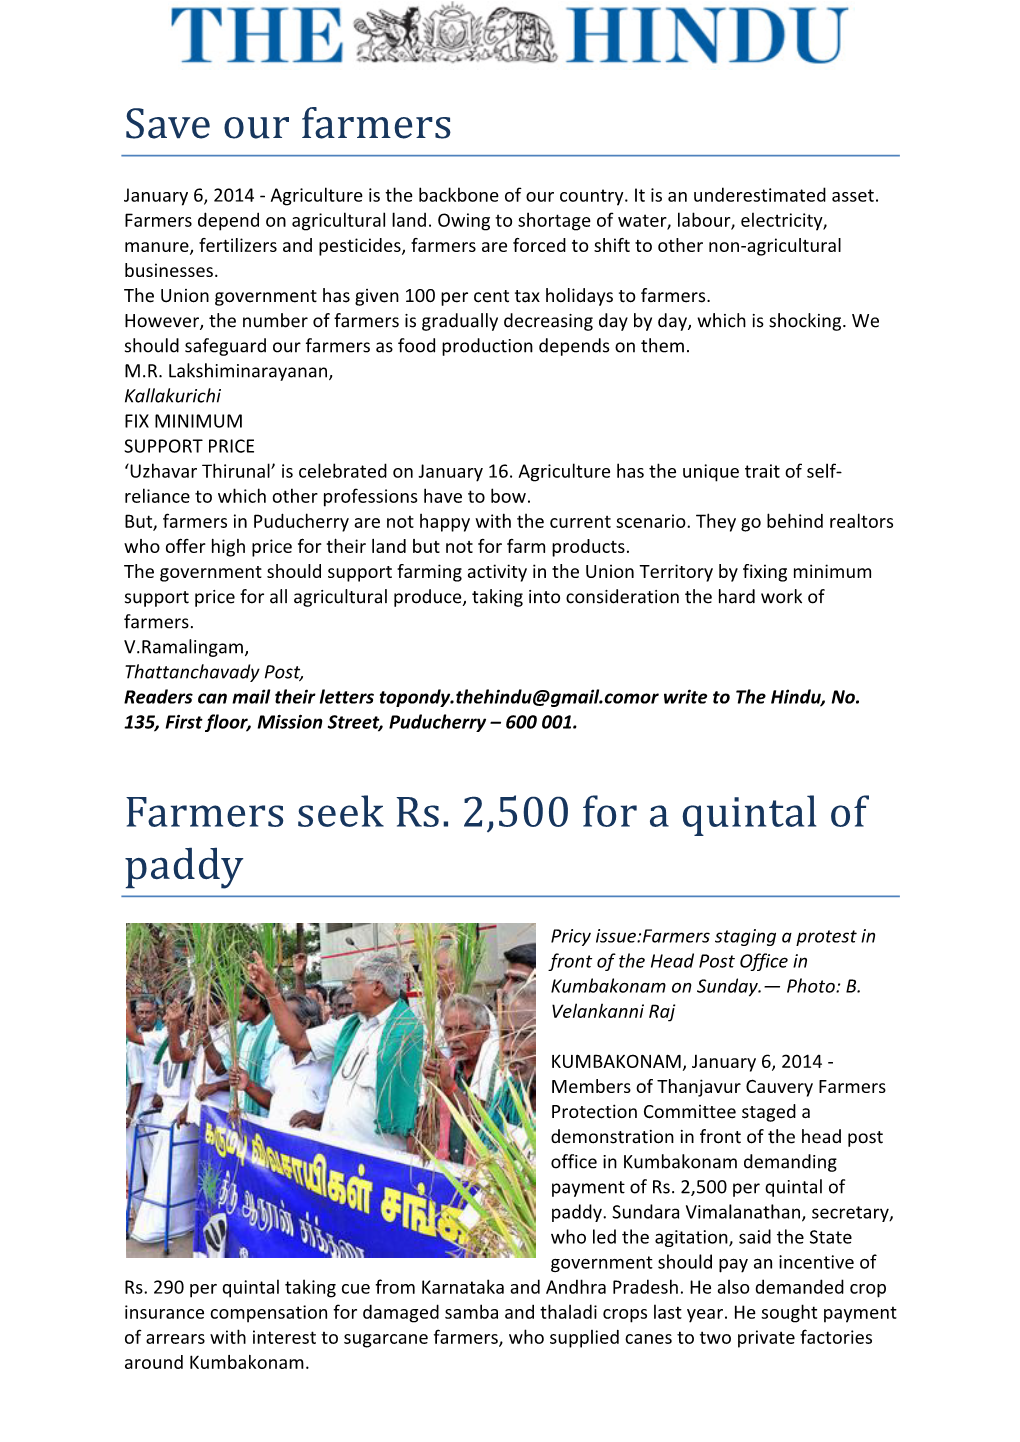 Save Our Farmers Farmers Seek Rs. 2,500 for a Quintal of Paddy